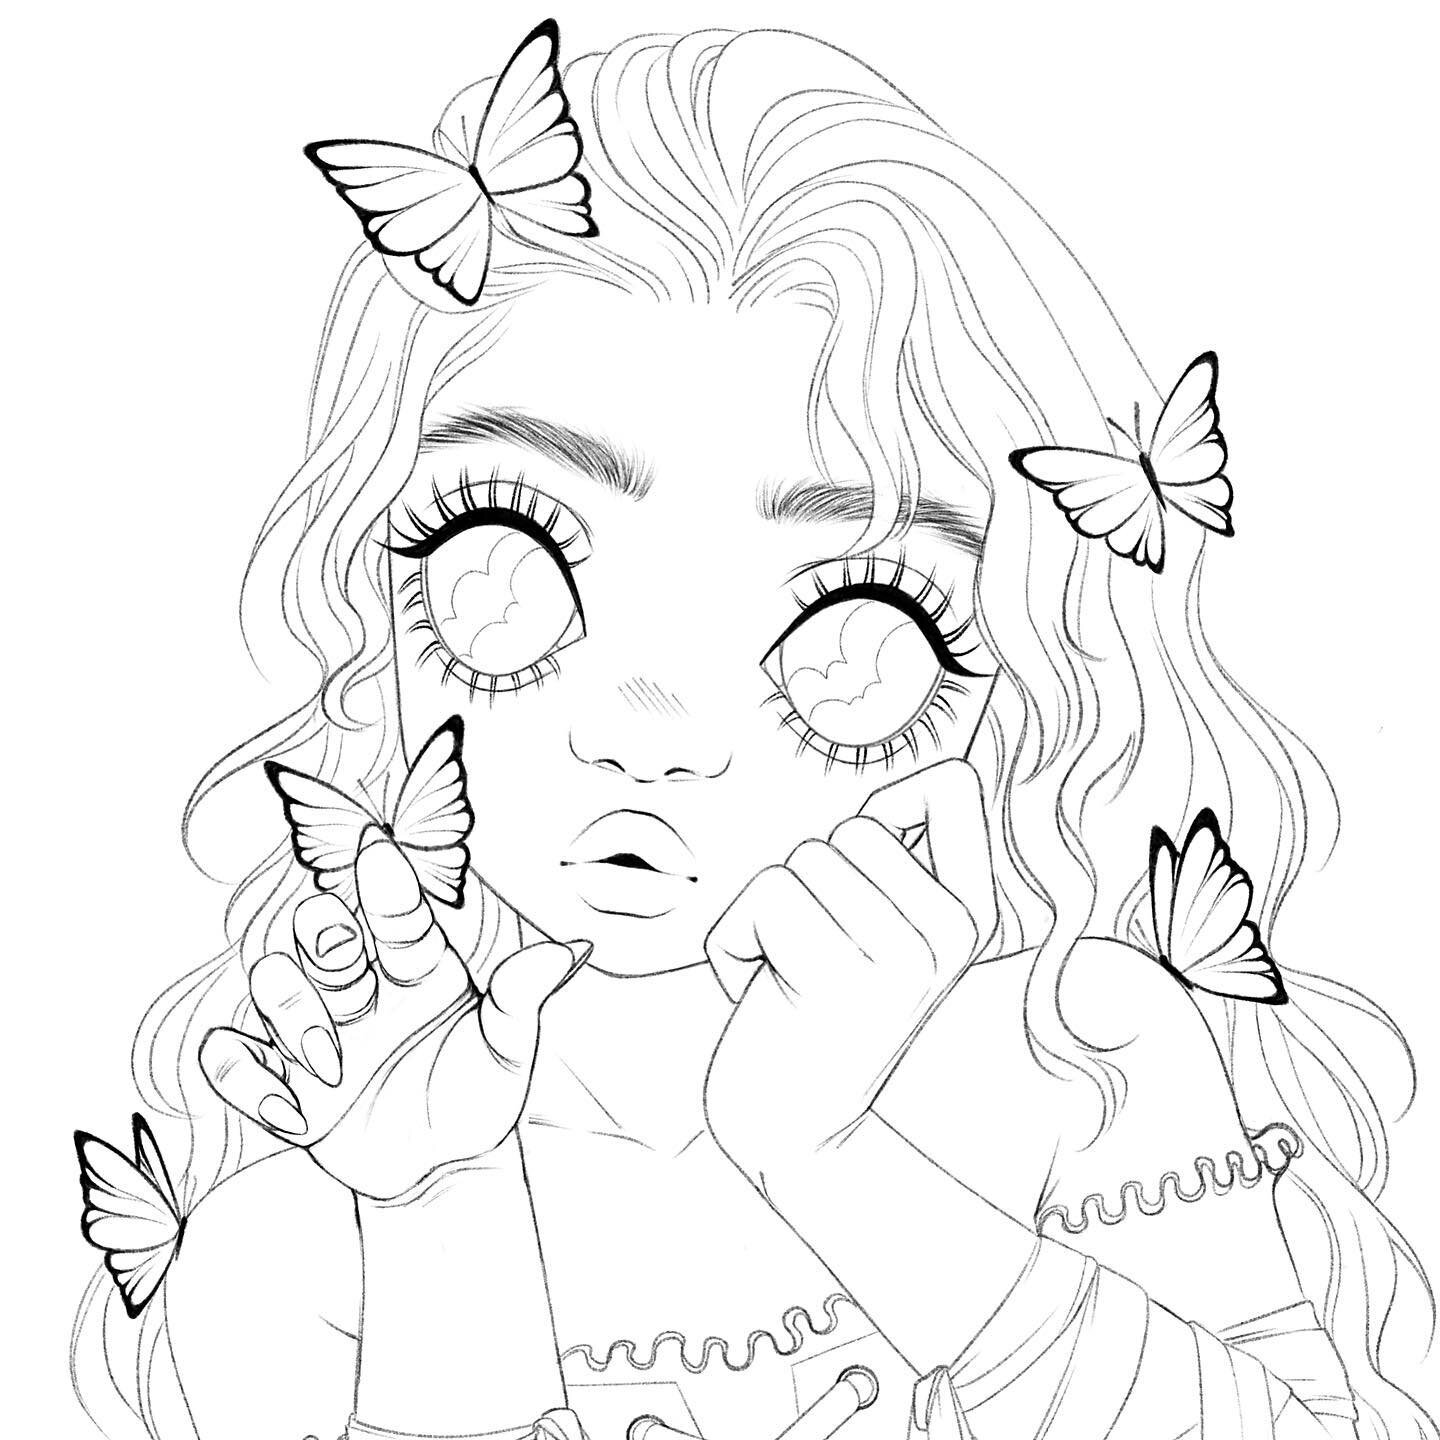 I&rsquo;ve been really wanting to make an artwork with butterflies lately so this is my most recent piece I&rsquo;ve been working on! I thought I would share just the linework with you, maybe you can guess the colors I&rsquo;ll use?? Hope you are all